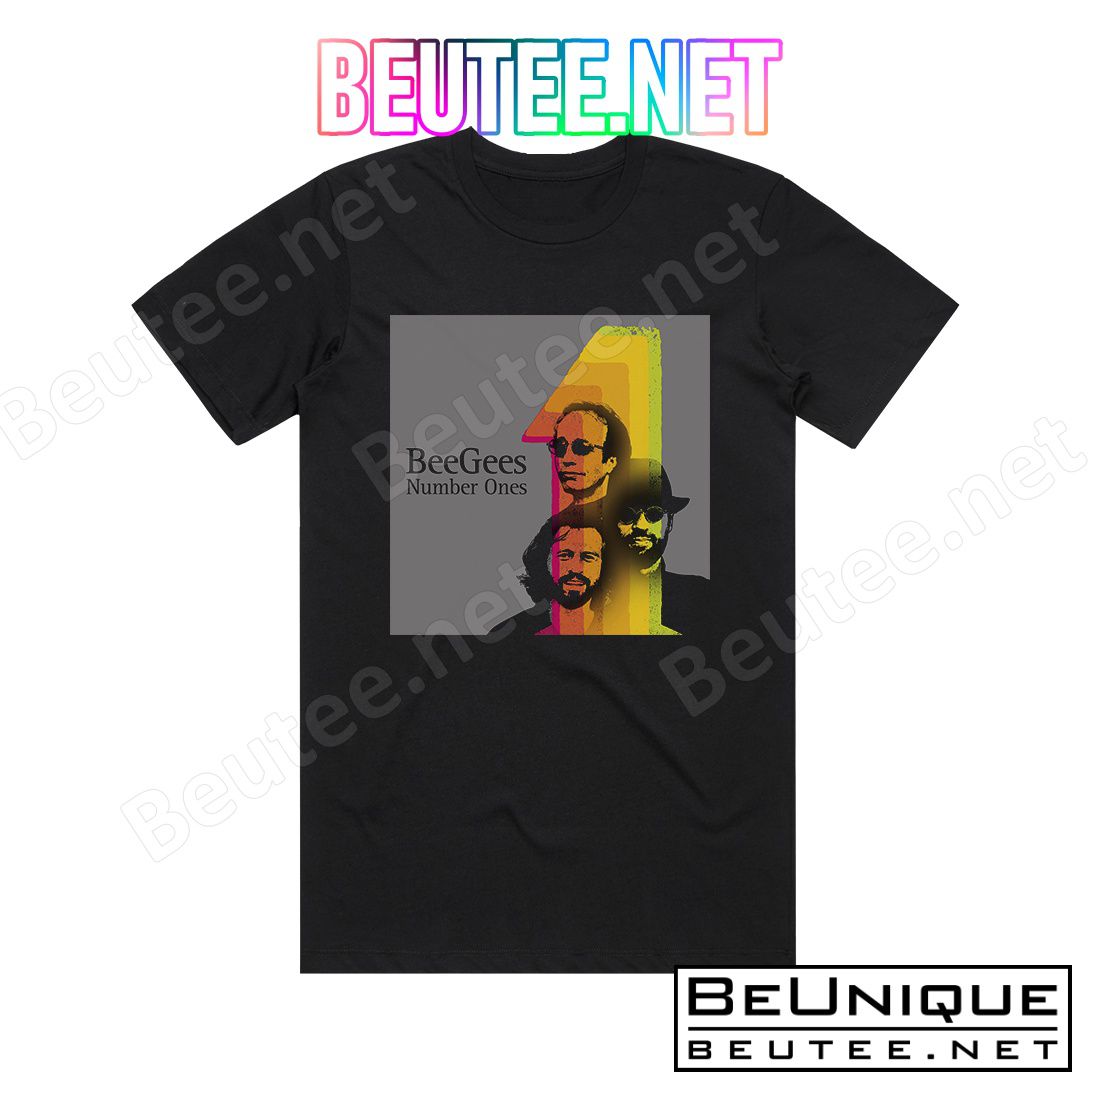 Bee Gees Number Ones Album Cover T-Shirt